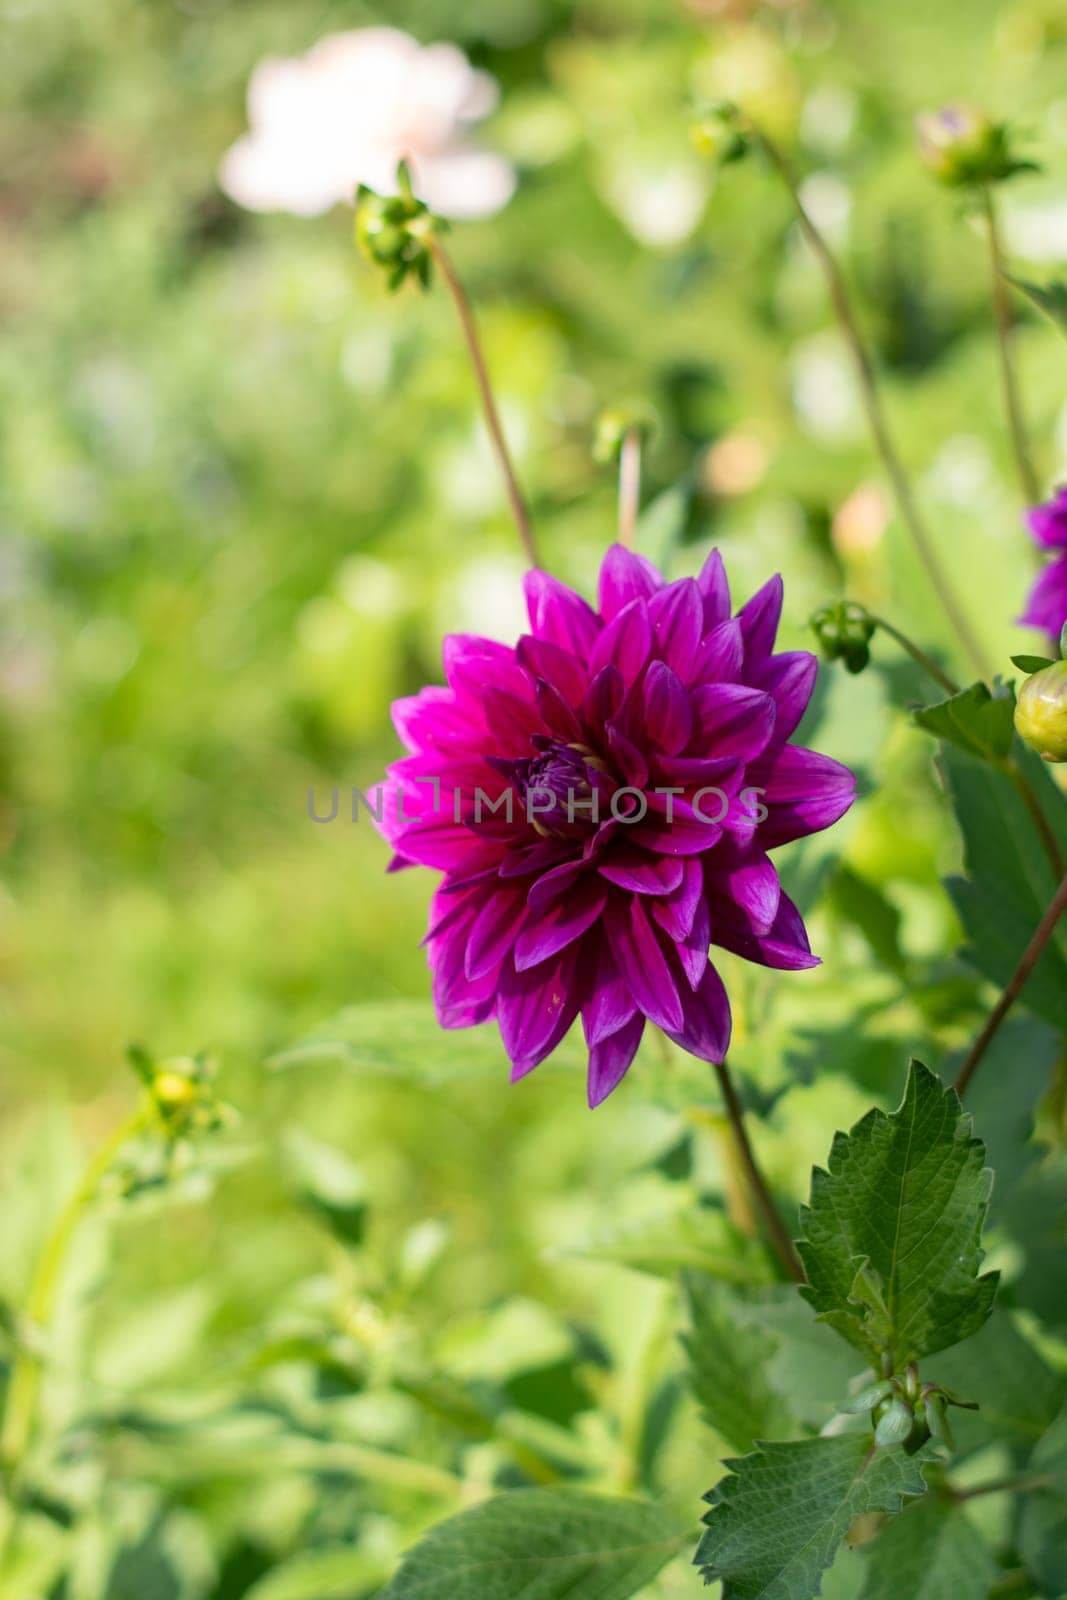 Purple decorative luxury, Thomas Edison dahlia in bloom in the summer garden, natural floral background, High quality photo